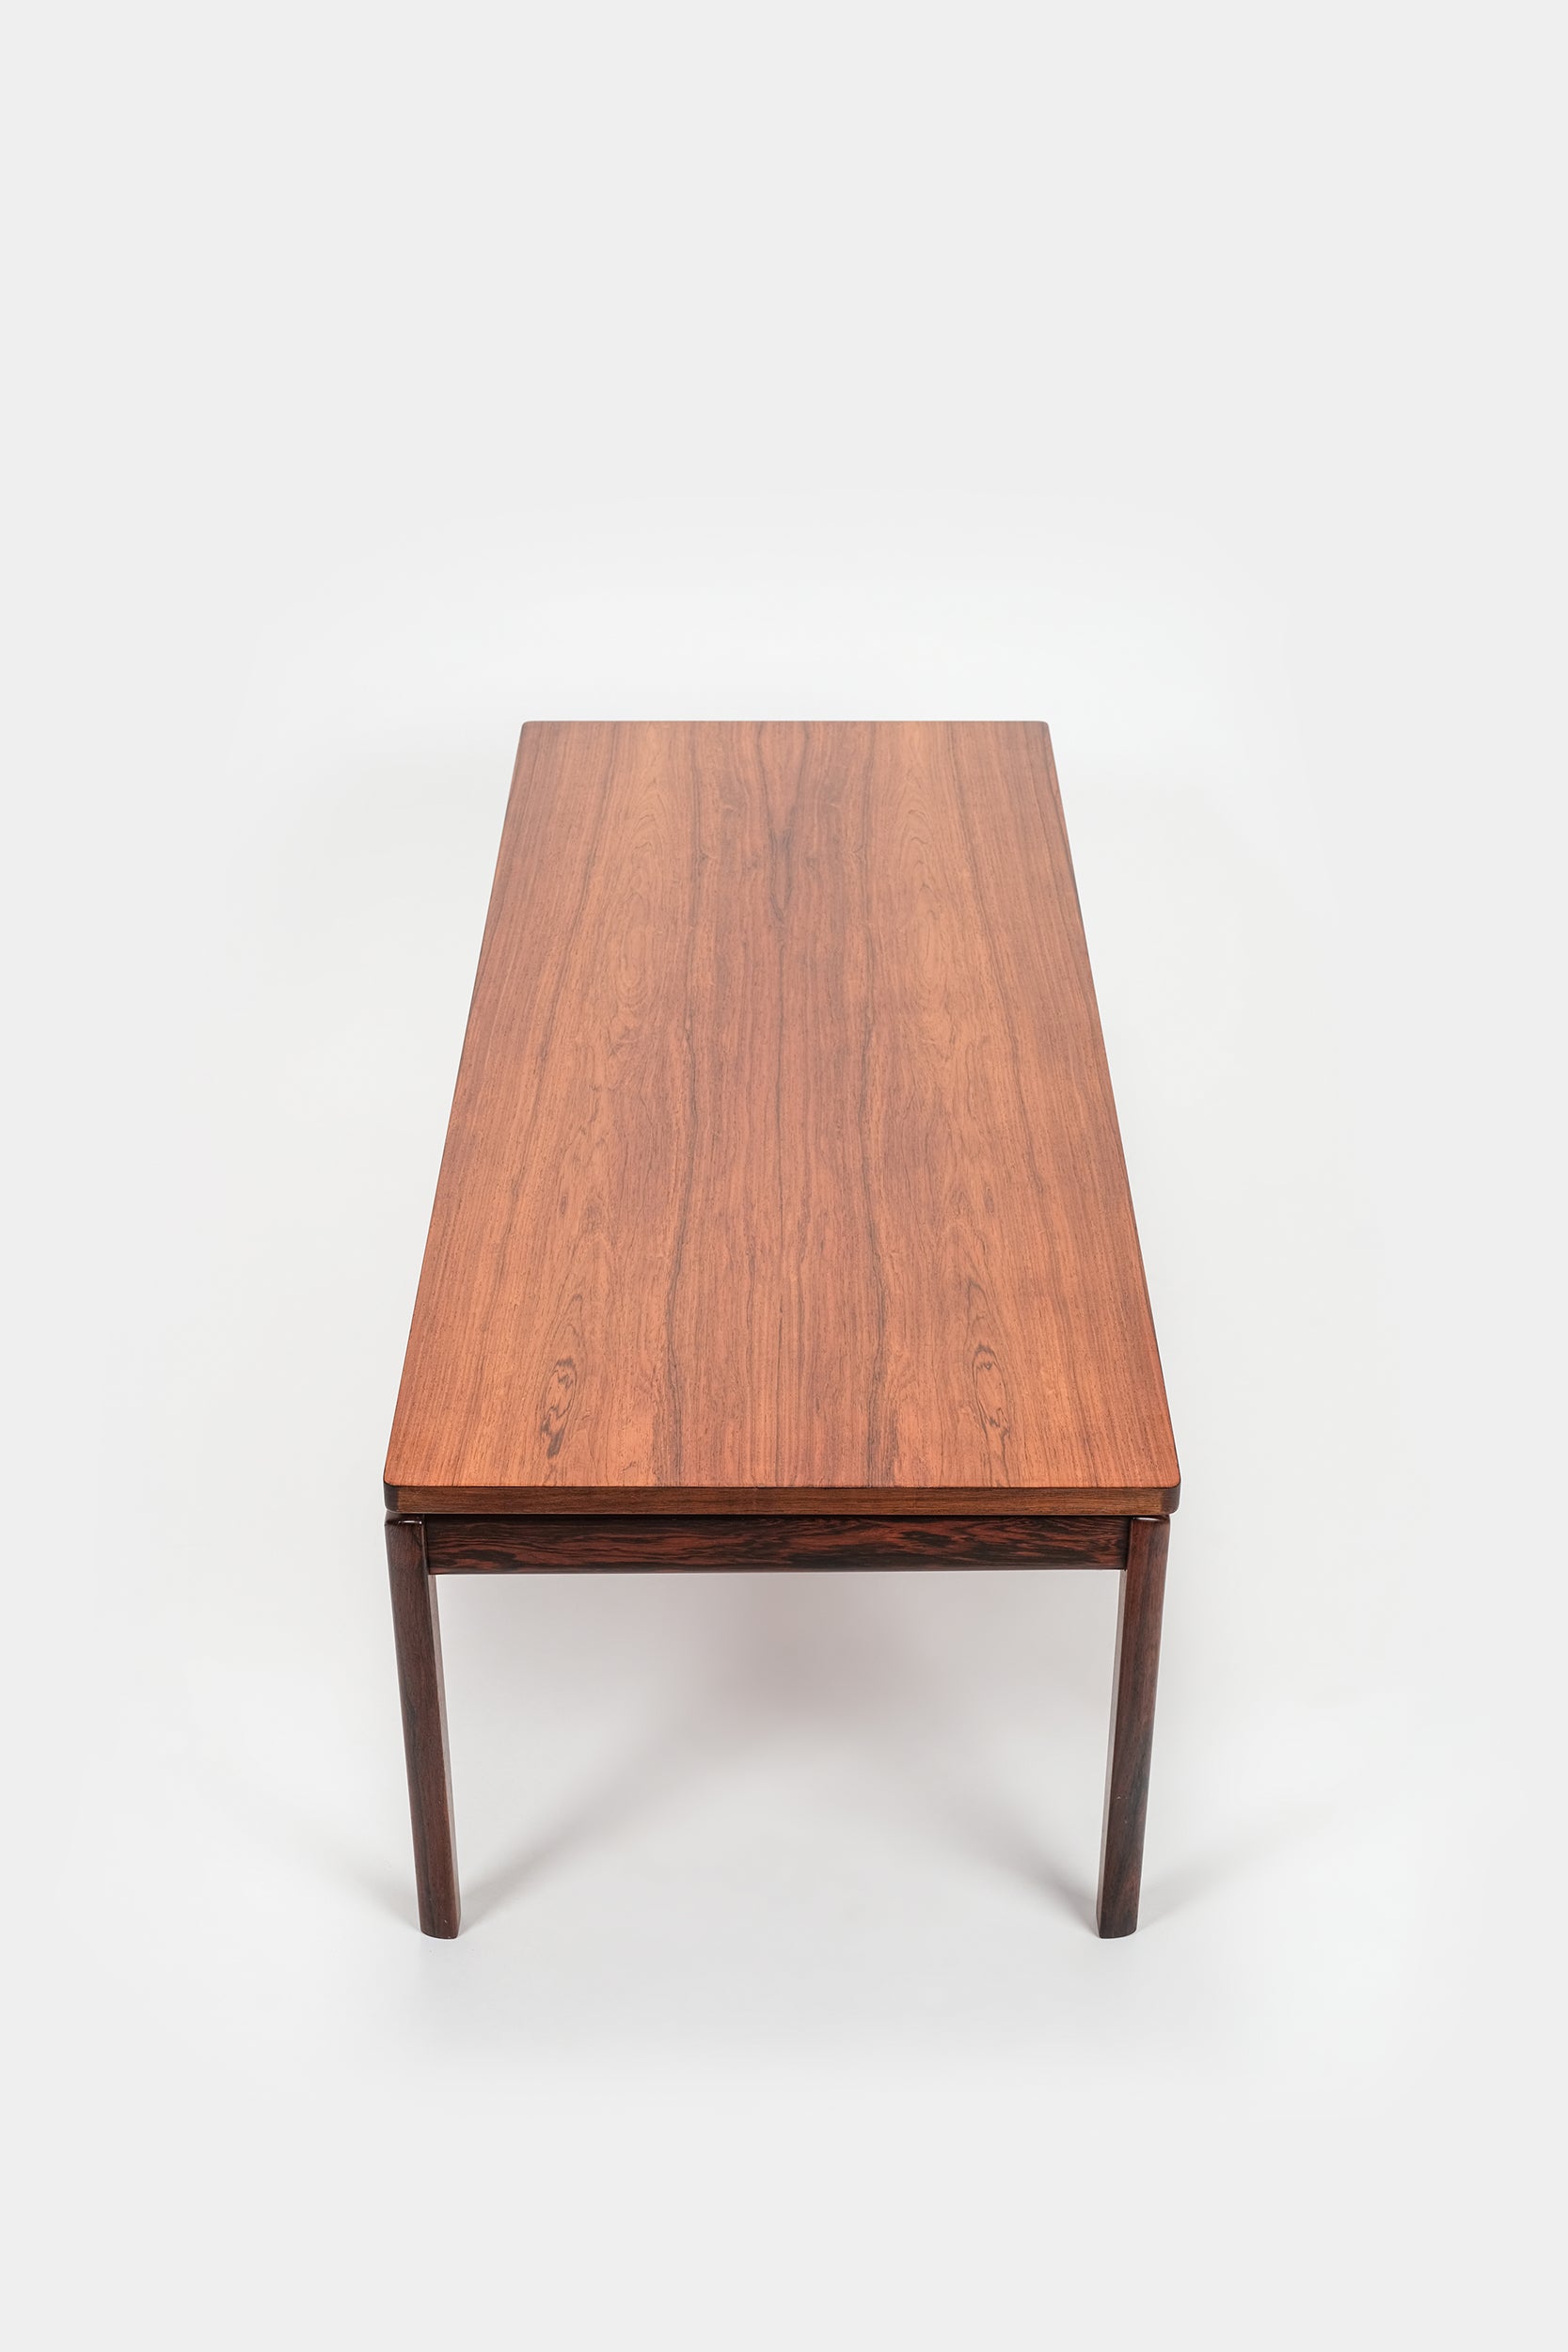 Ole Wanscher Club Table, Rosewood, 60s